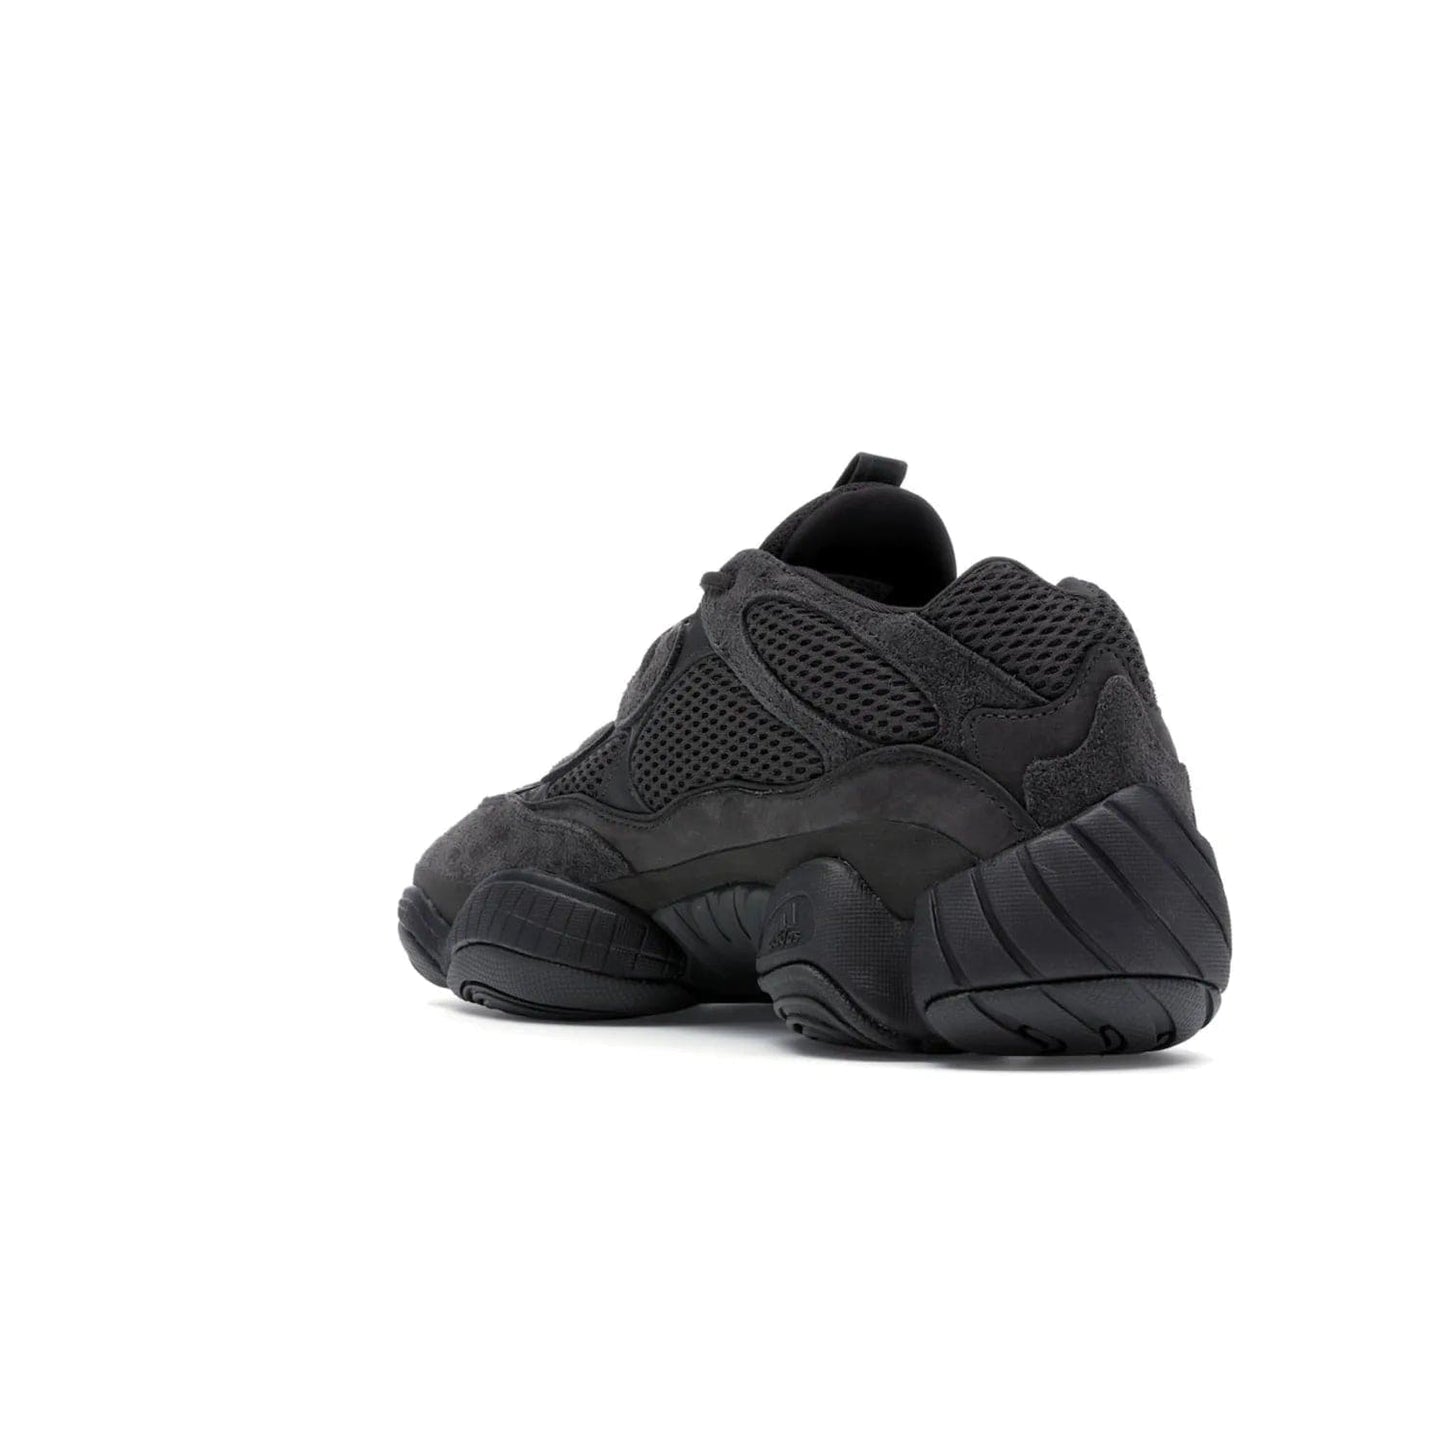 adidas Yeezy 500 Utility Black - Image 25 - Only at www.BallersClubKickz.com - Iconic adidas Yeezy 500 Utility Black in All-Black colorway. Durable black mesh and suede upper with adiPRENE® sole delivers comfort and support. Be unstoppable with the Yeezy 500 Utility Black. Released July 2018.